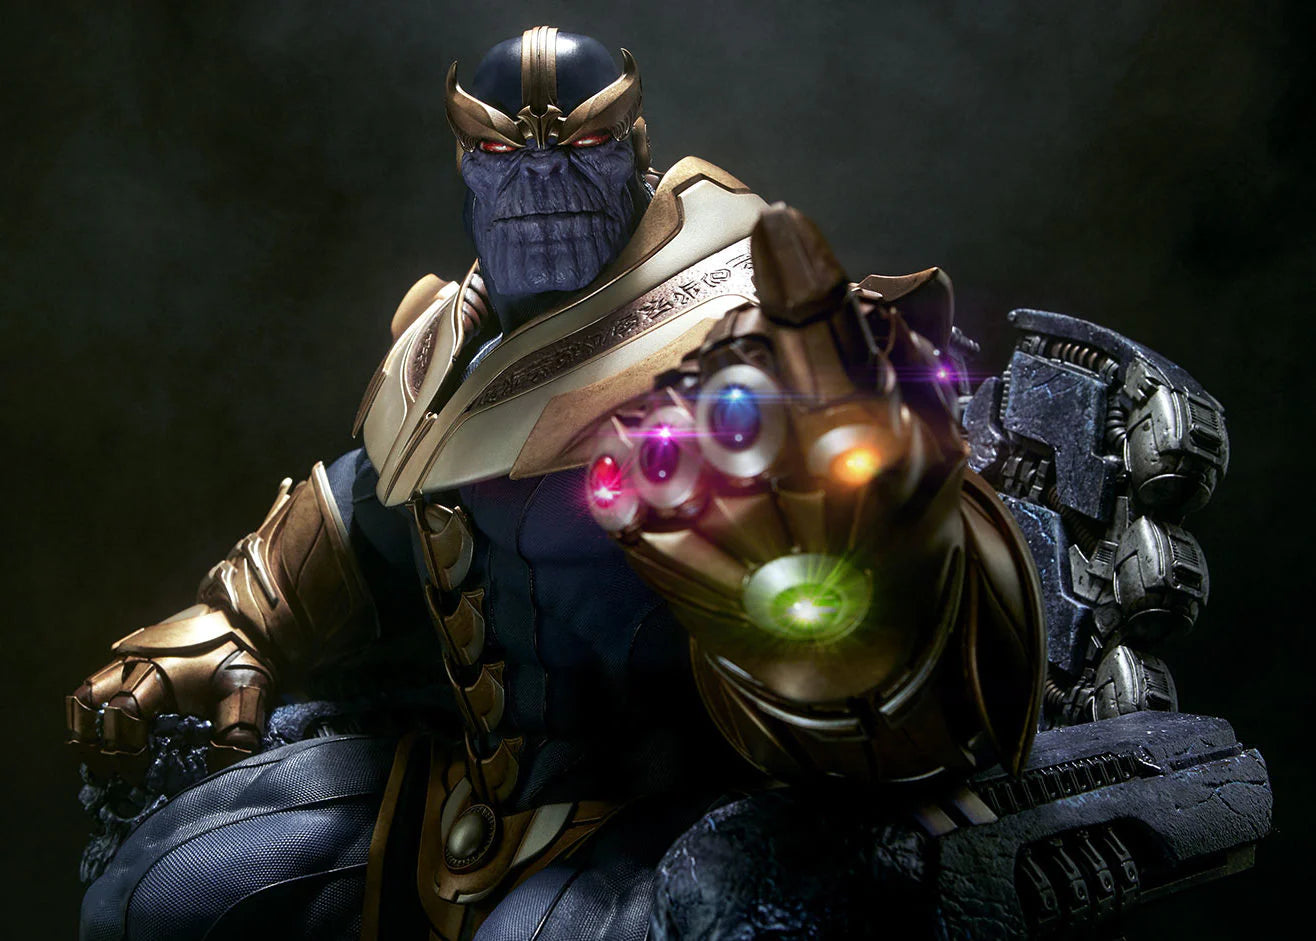 Sideshow Collectibles - Thanos on Throne Maquette - EmporiumWDDCT